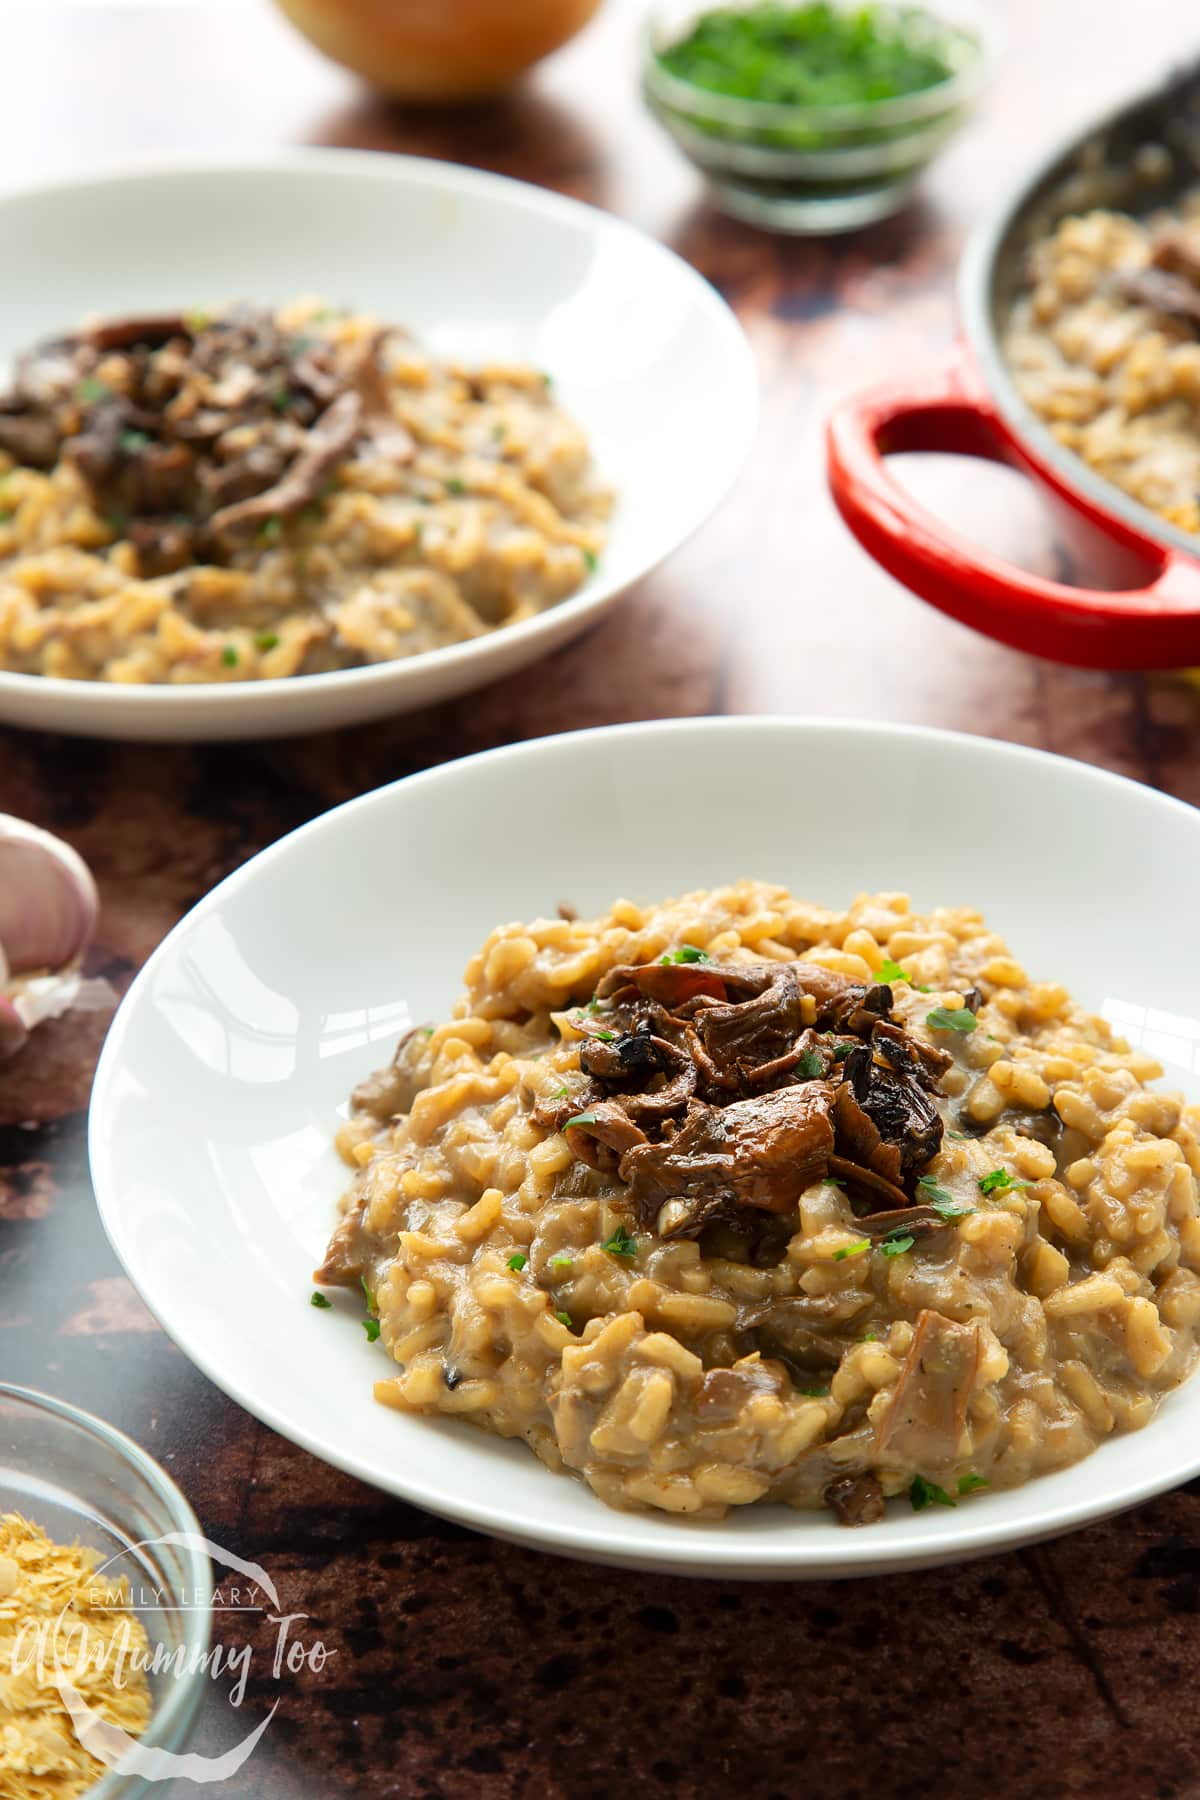 Vegan mushroom risotto in a shallow white bowl, shown from the side.